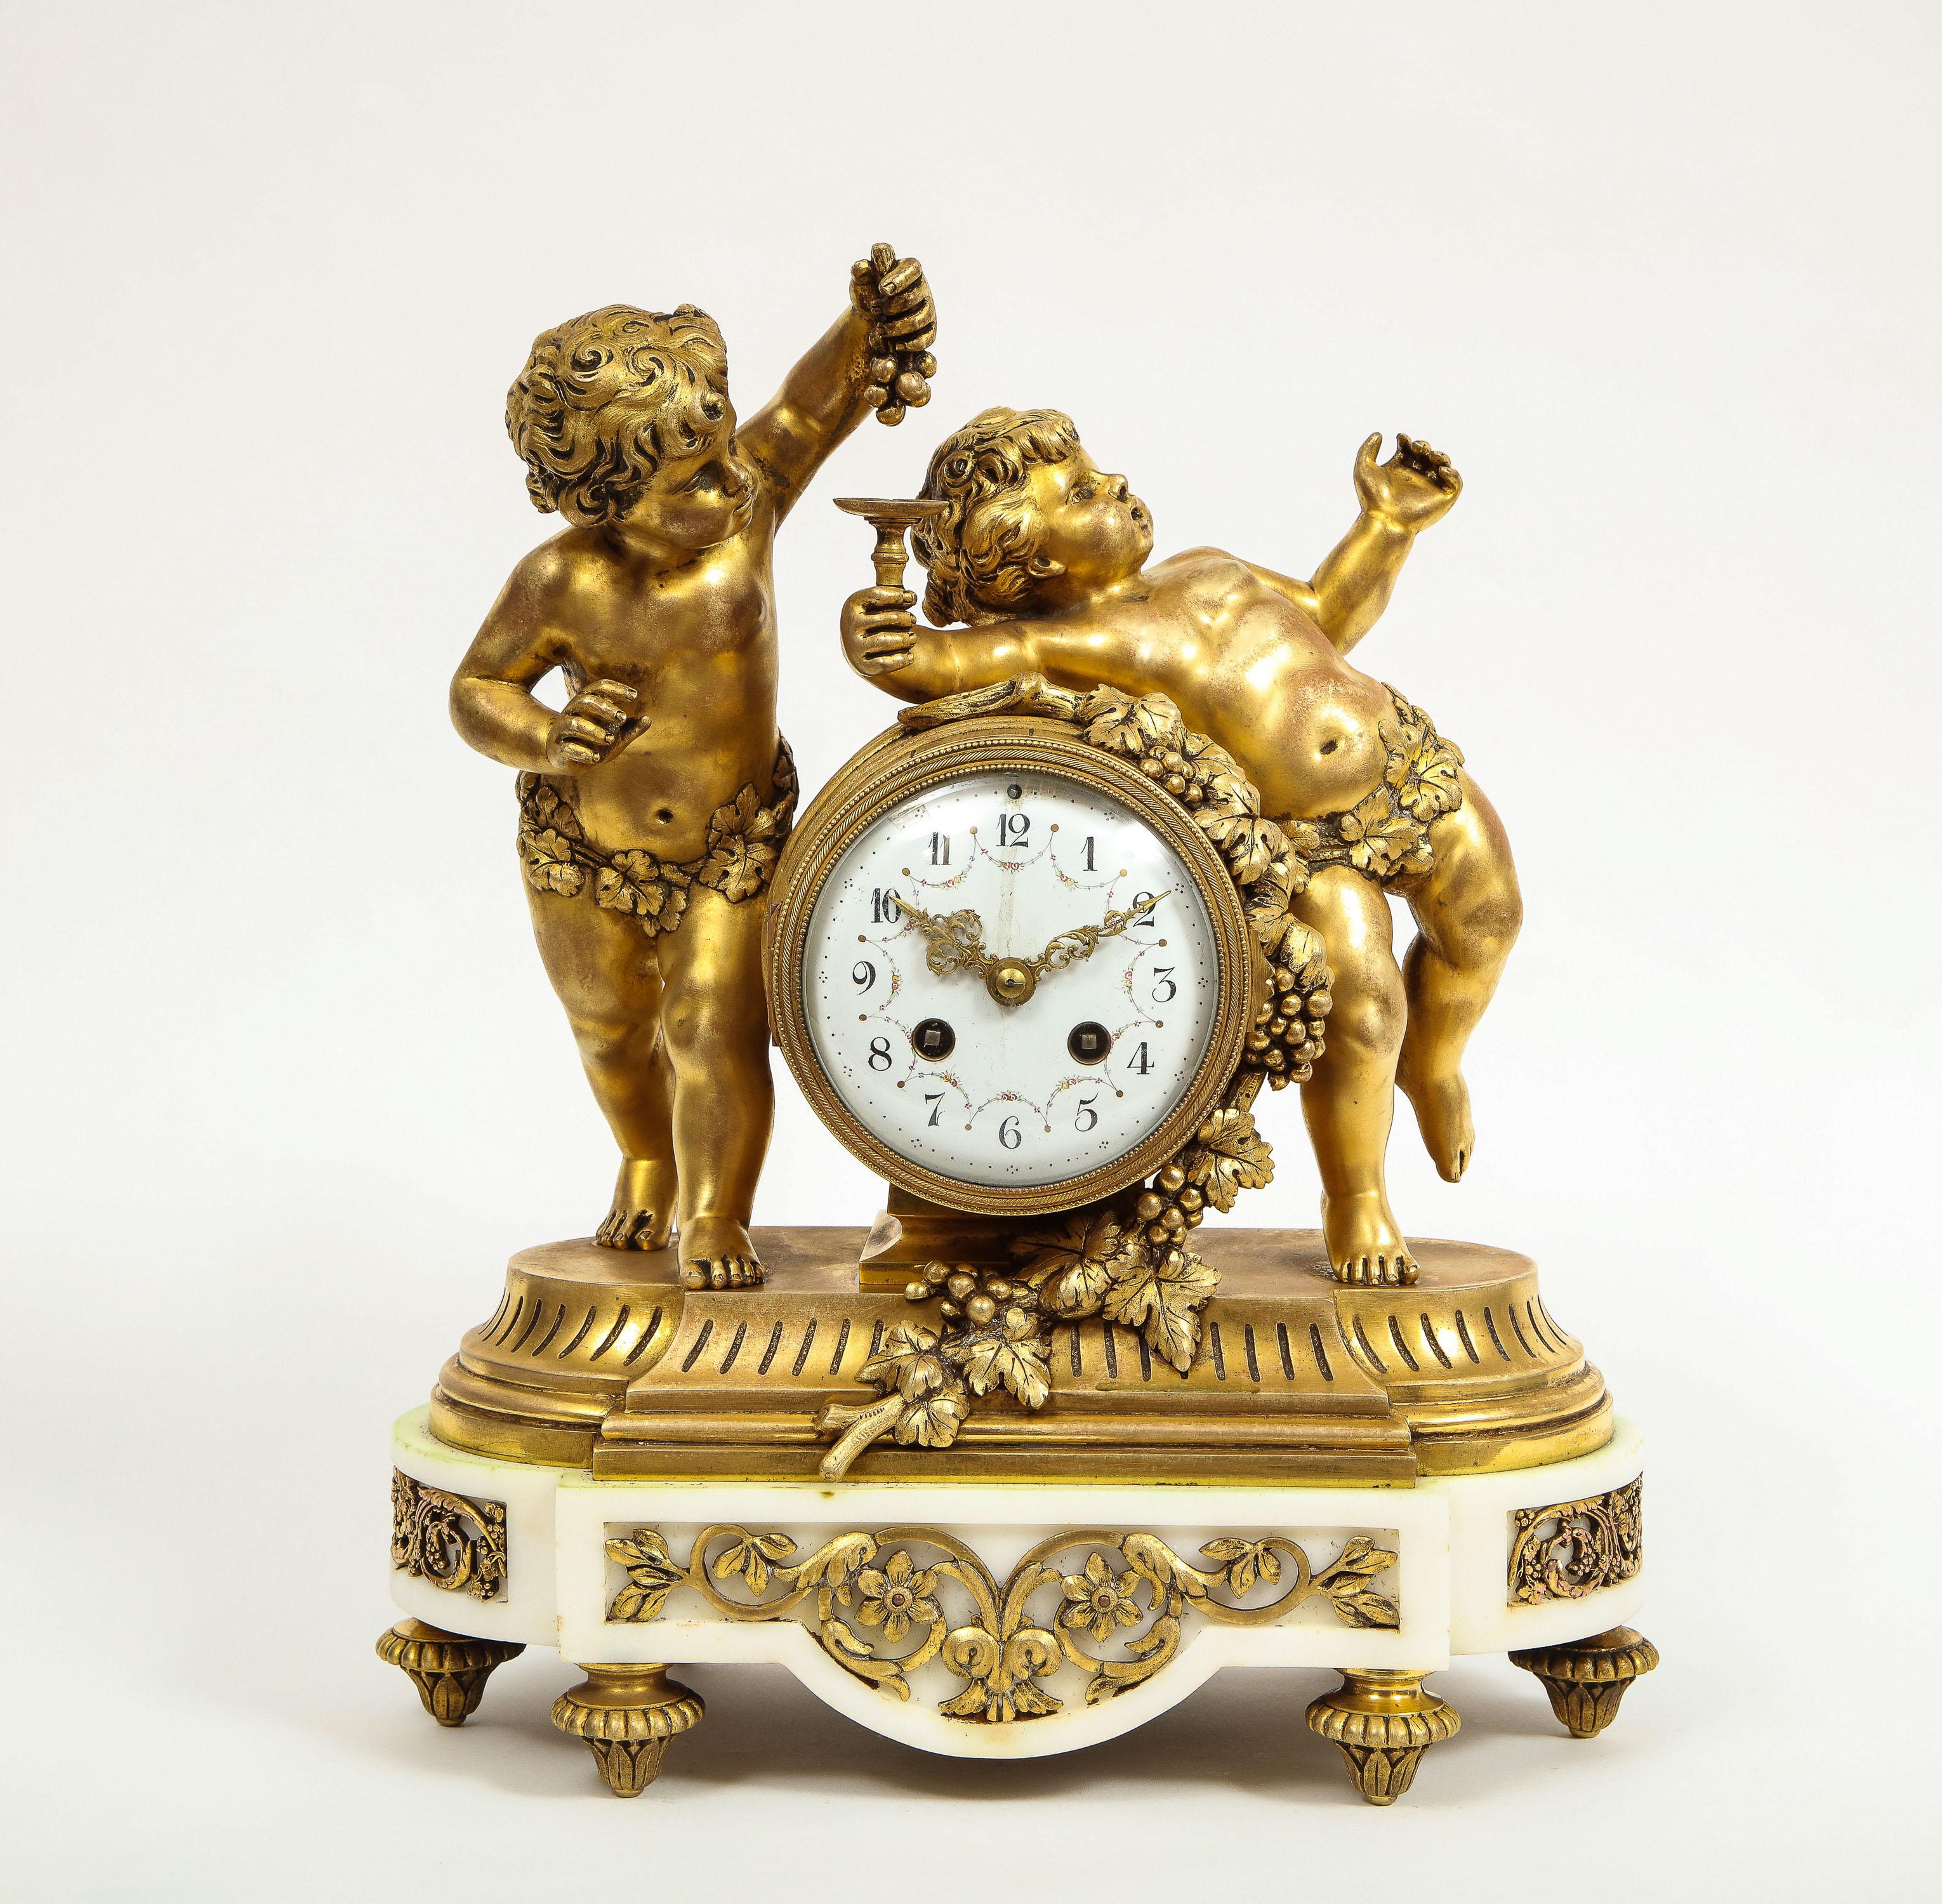 French Ormolu-mounted white marble three piece clock garniture, after Clodion, circa 1880.

Comprising of a wine barrel shaped clock with two putti making wine from grapes, and a pair of two-light candlesticks depicting putti, signed